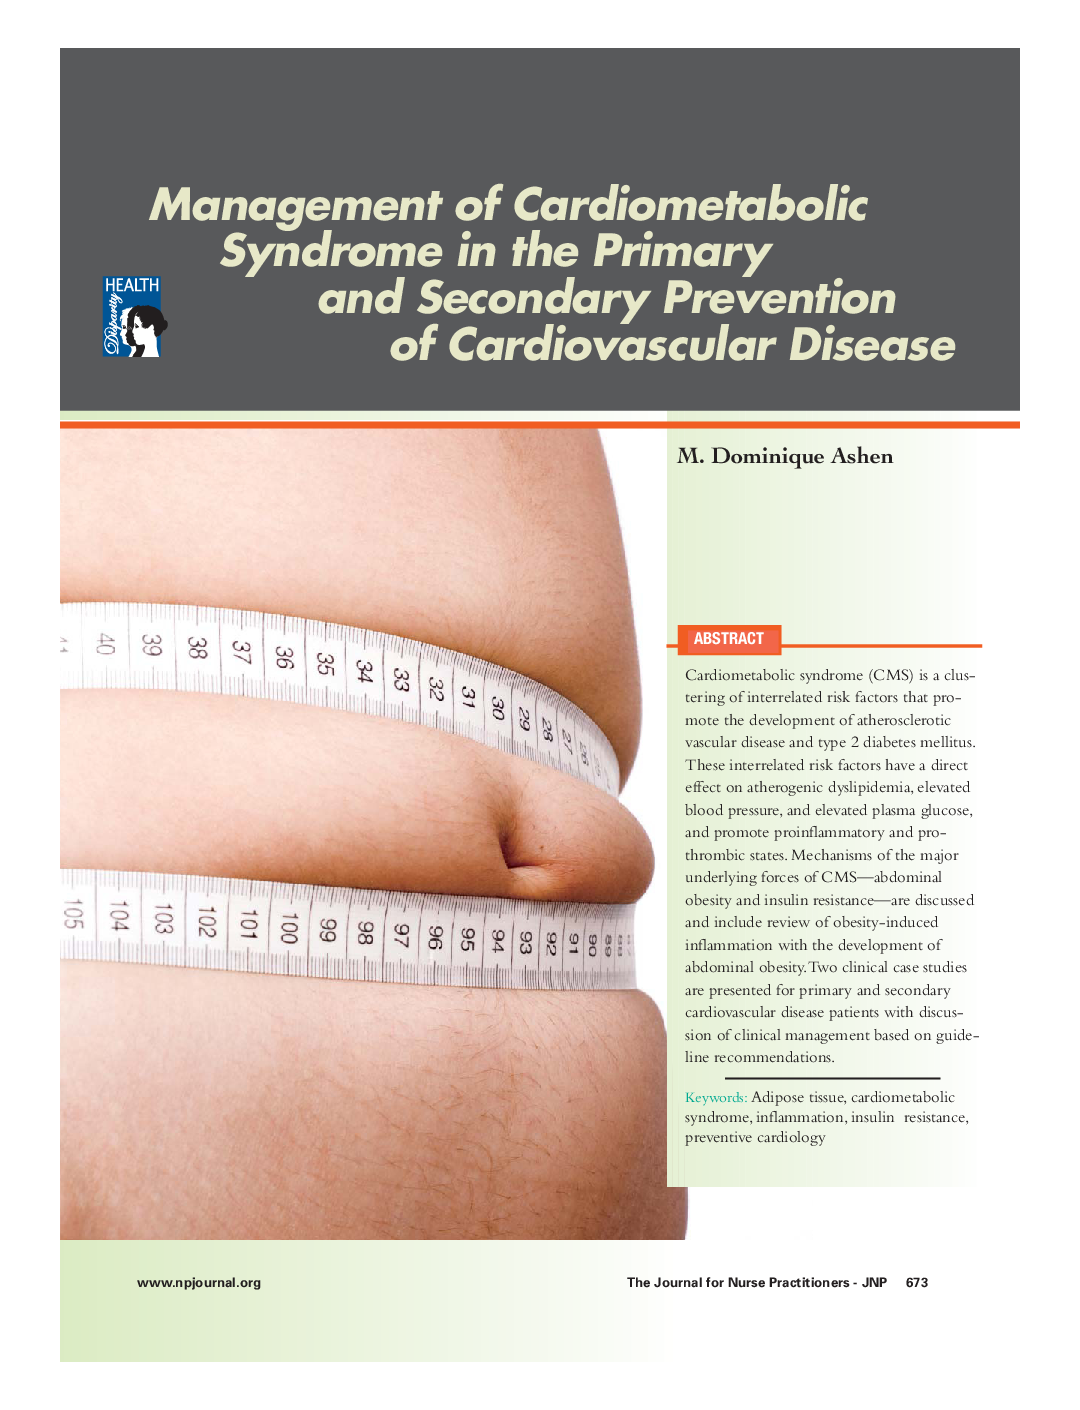 Management of Cardiometabolic Syndrome in the Primary and Secondary Prevention of Cardiovascular Disease 